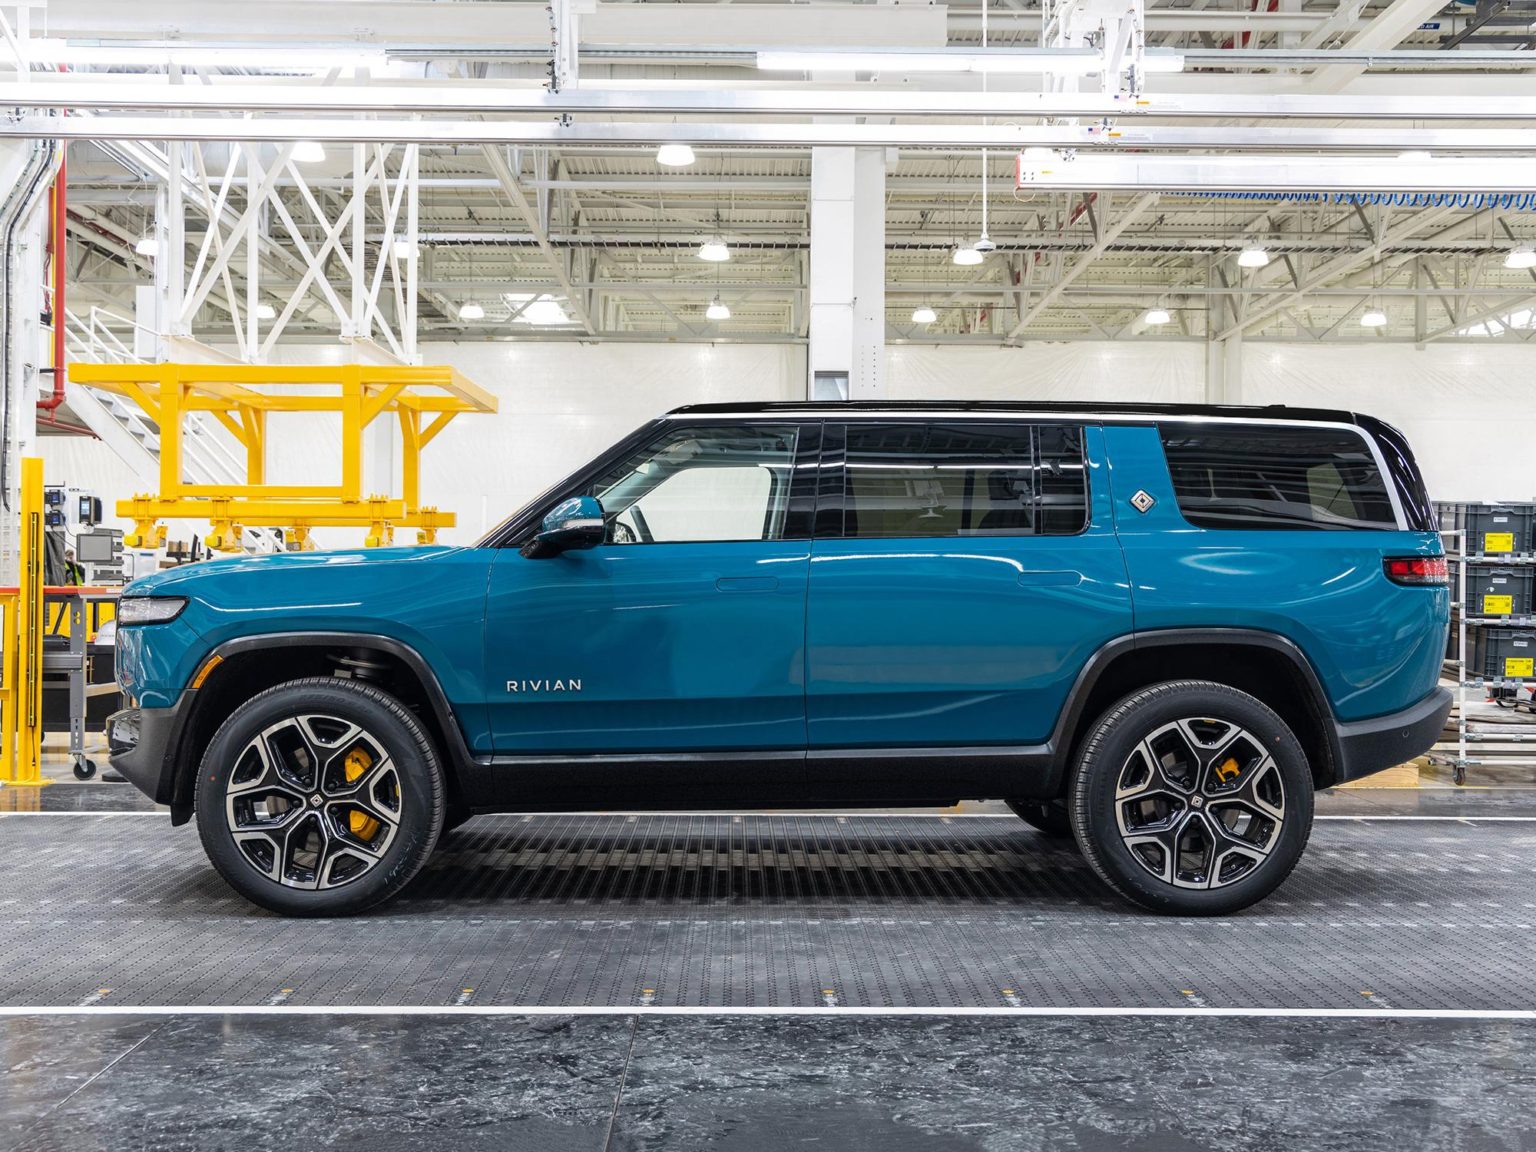 Rivian has shown new photos of the R1S on the production line.